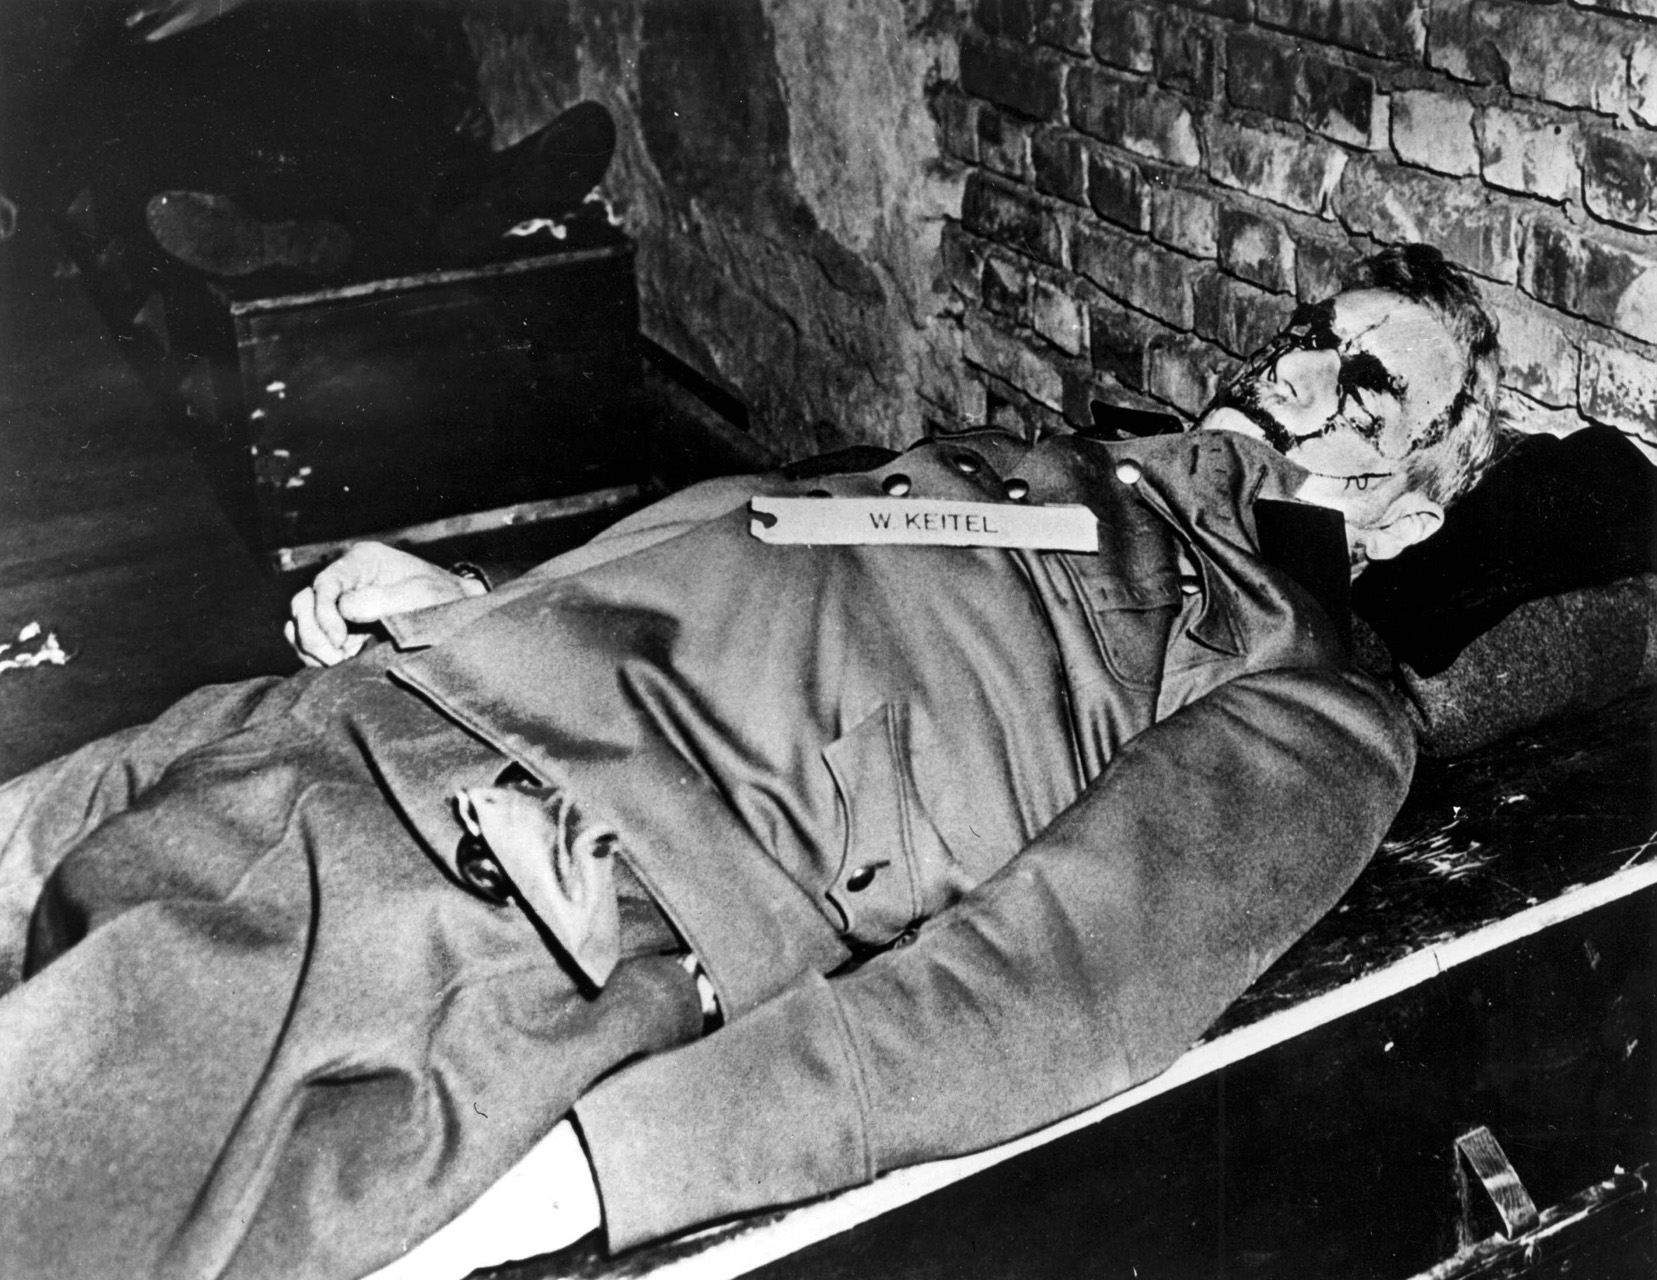 Post-mortem photo of Field Marshal Wilhelm Keitel. His bloodied face reportedly came from striking the edge of the opening in the gallows platform.